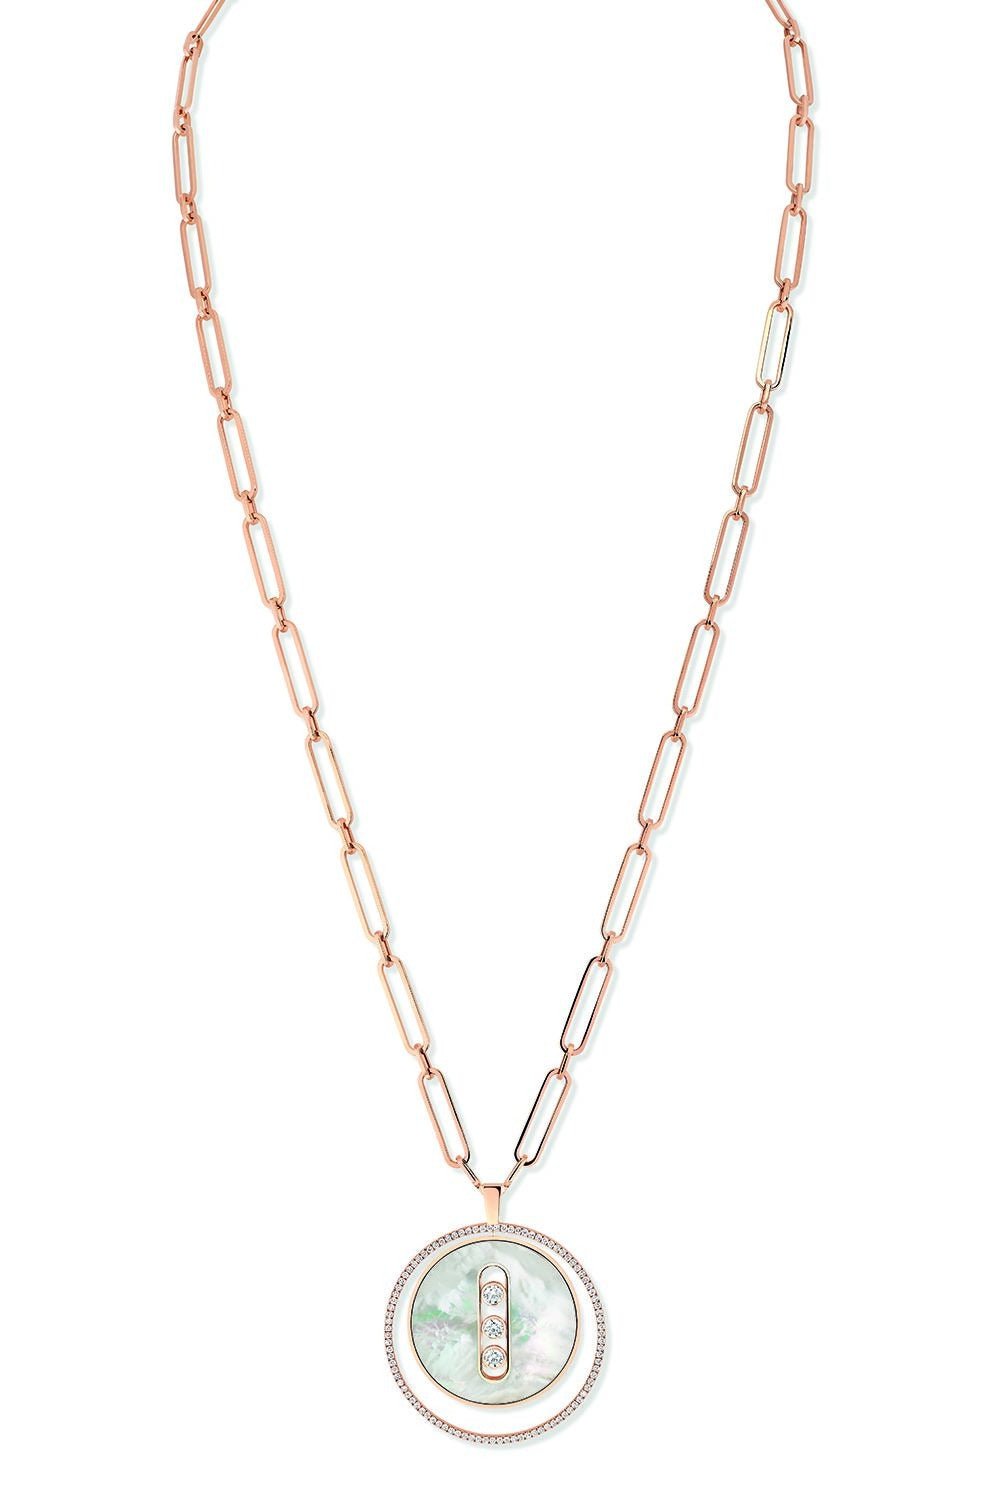 MESSIKA-Lucky Move Long Pendant Necklace-ROSE GOLD